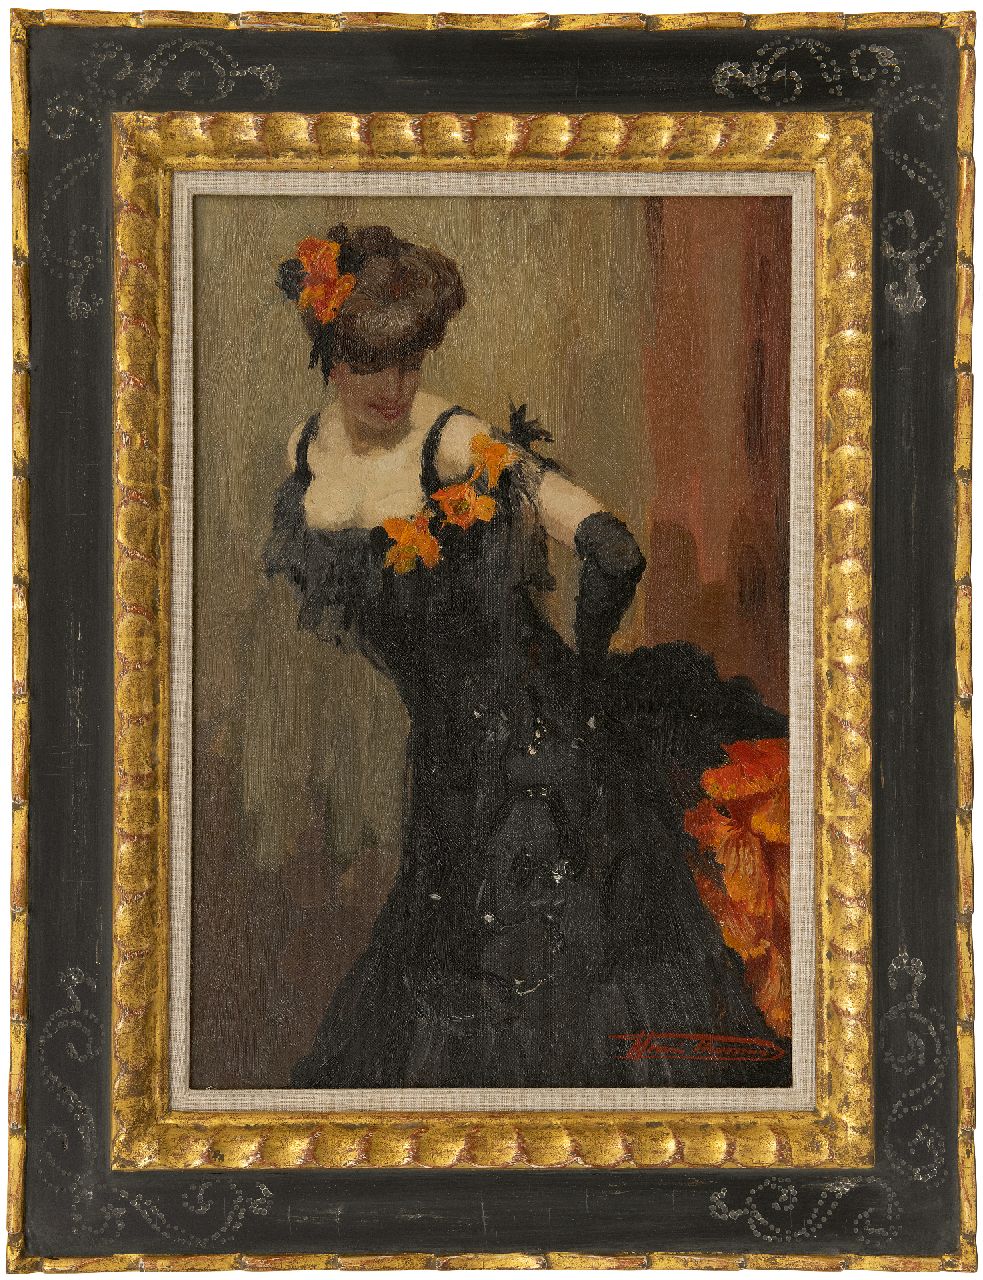 Thomas H.J.  | Henri Joseph Thomas | Paintings offered for sale | Dancer in a black dress, oil on canvas 45.3 x 30.3 cm, signed l.r.